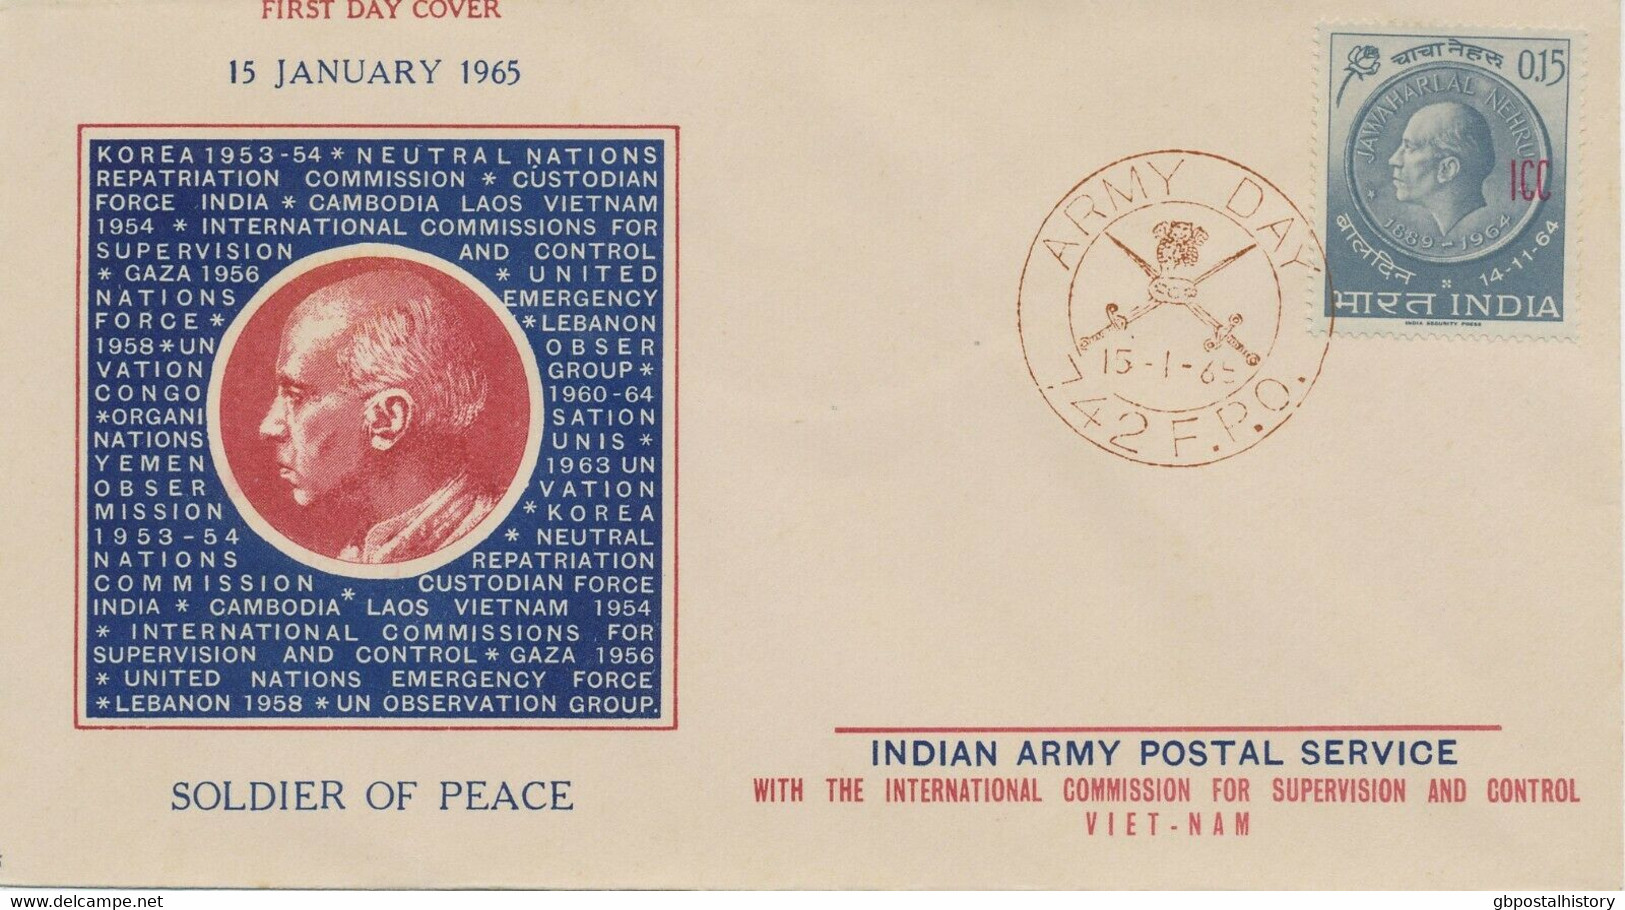 INDIA Indian Police Forces In Laos And Vietnam 1965 Army Day W. Overprint "ICC" - Militaire Vrijstelling Van Portkosten